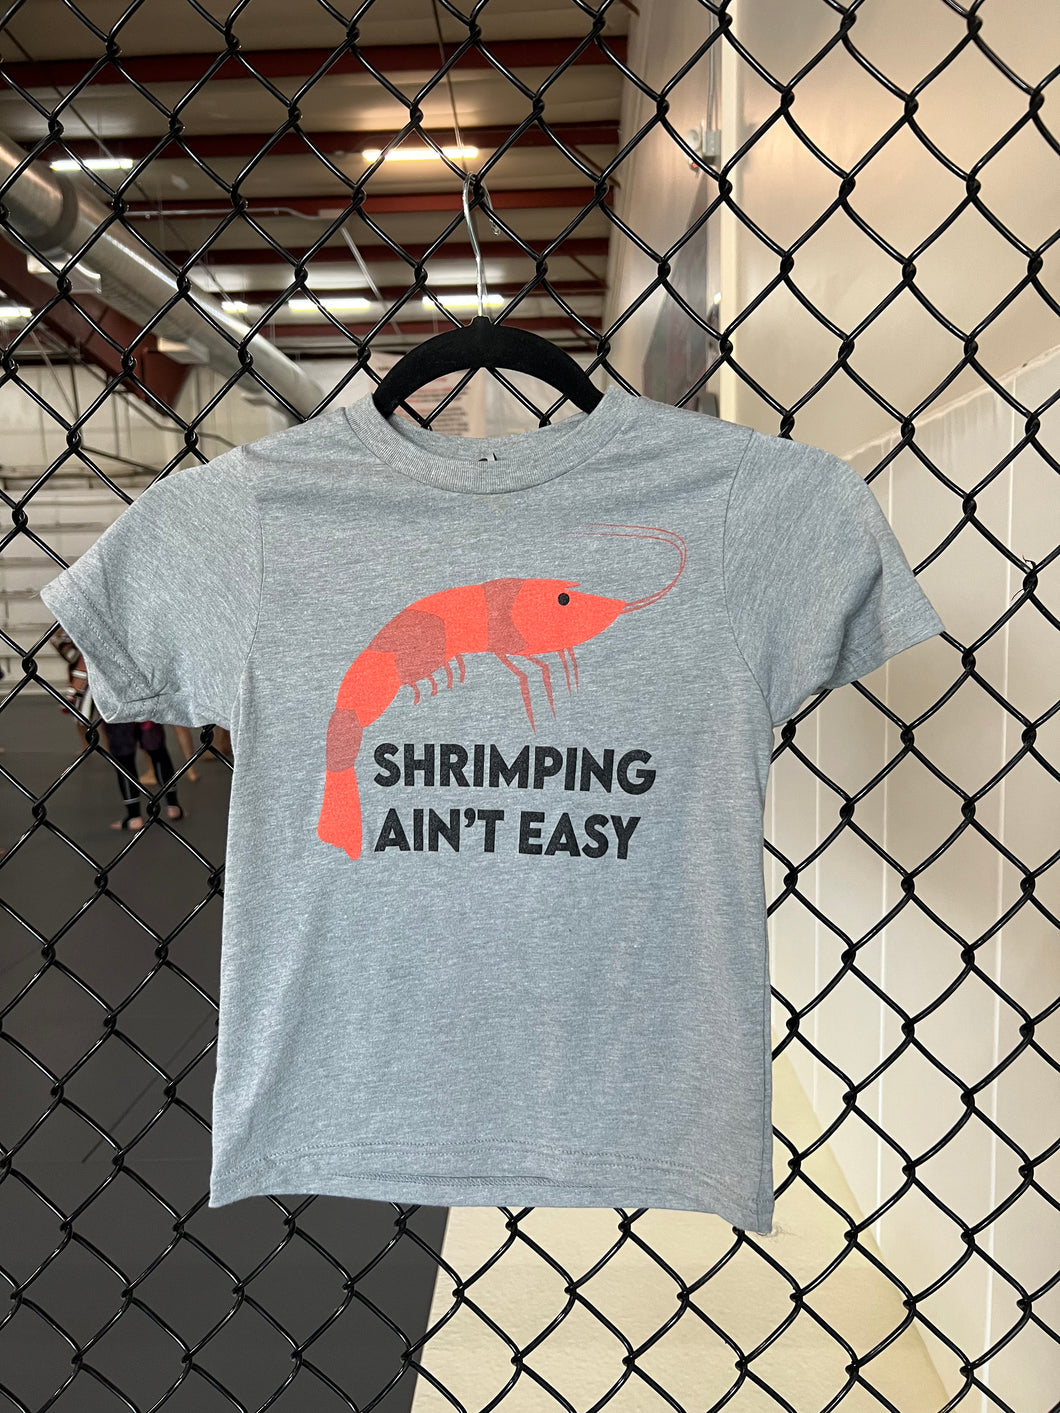 Shrimpin ain’t easy T-Shirt (KIDS SIZING)(Adult Size Small and Medium)